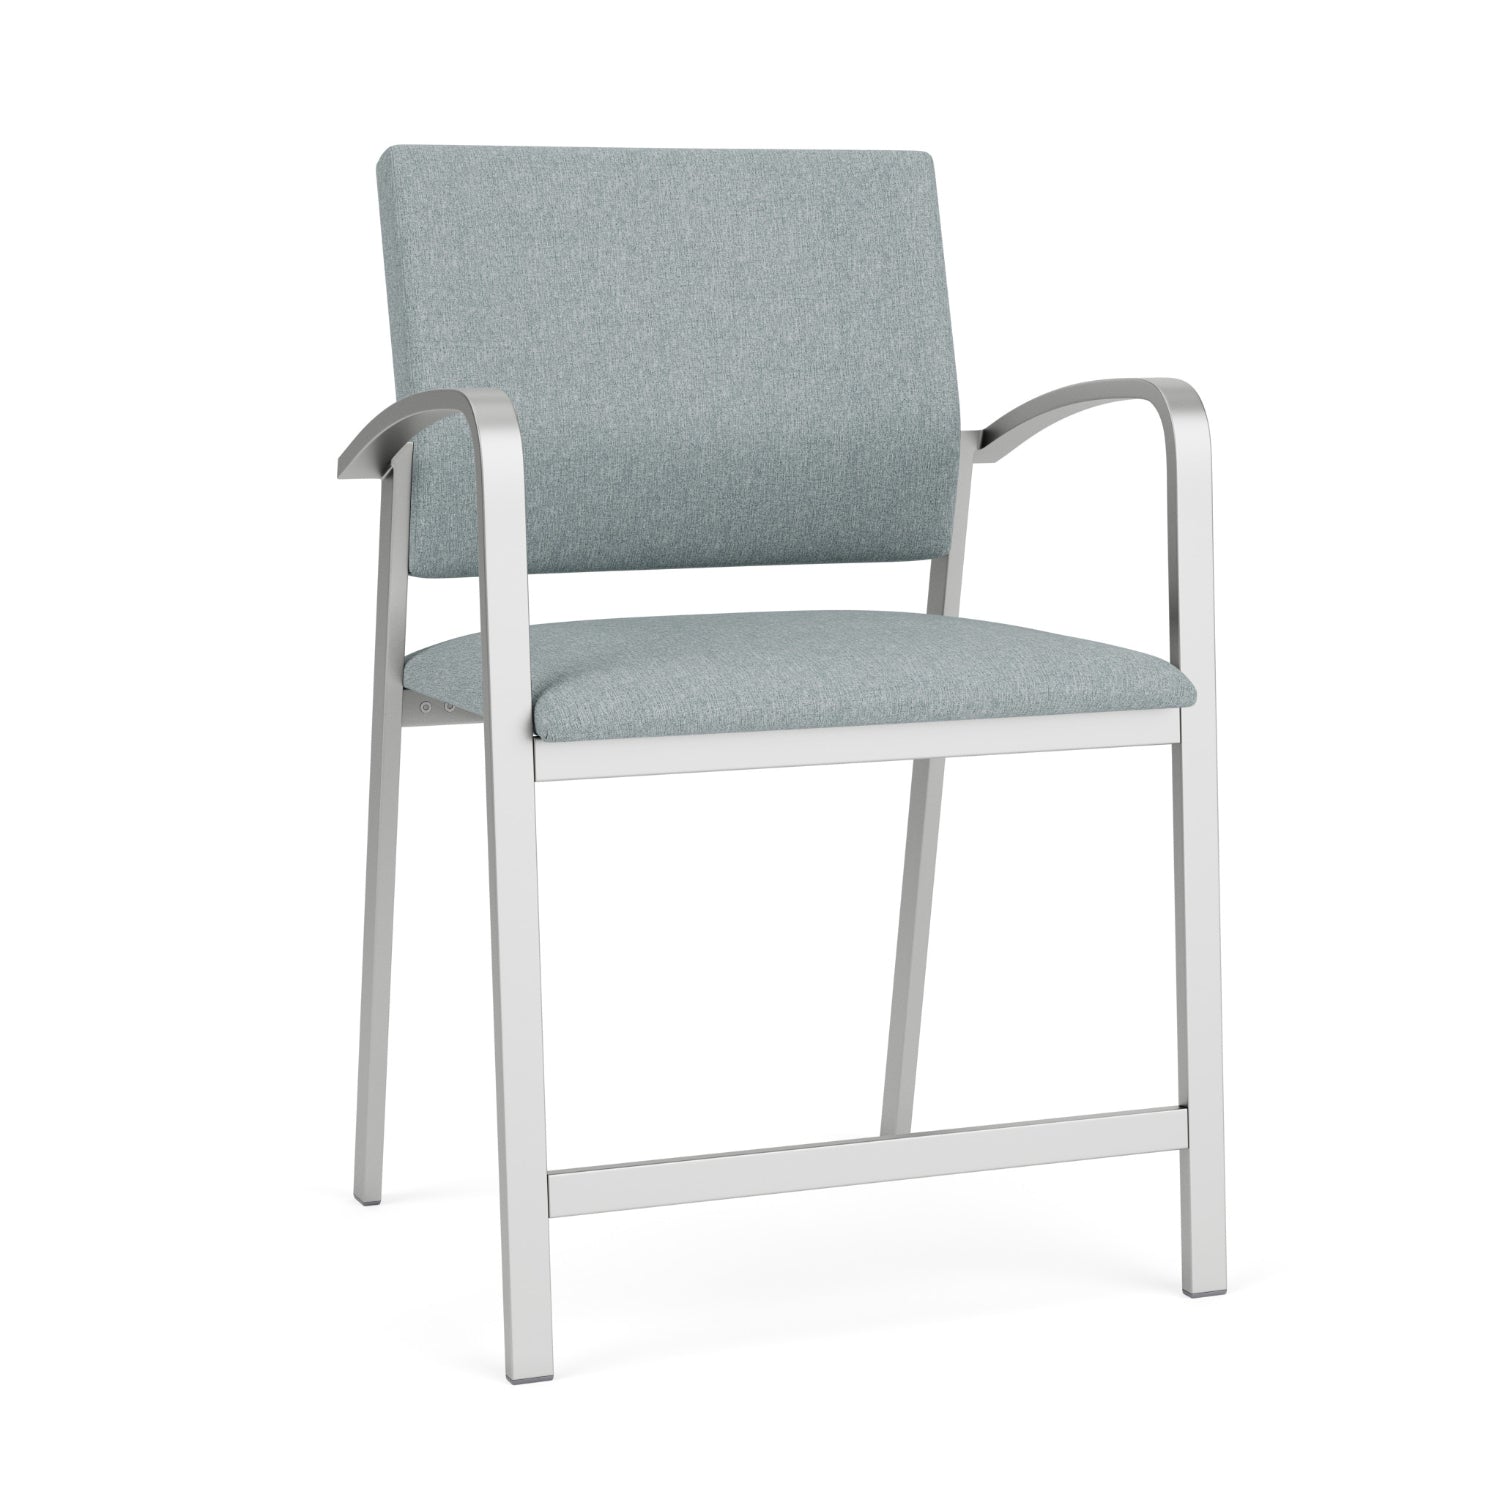 Newport Collection Reception Seating, Oversize Hip Chair, 400 lb. Capacity, Healthcare Vinyl Upholstery, FREE SHIPPING